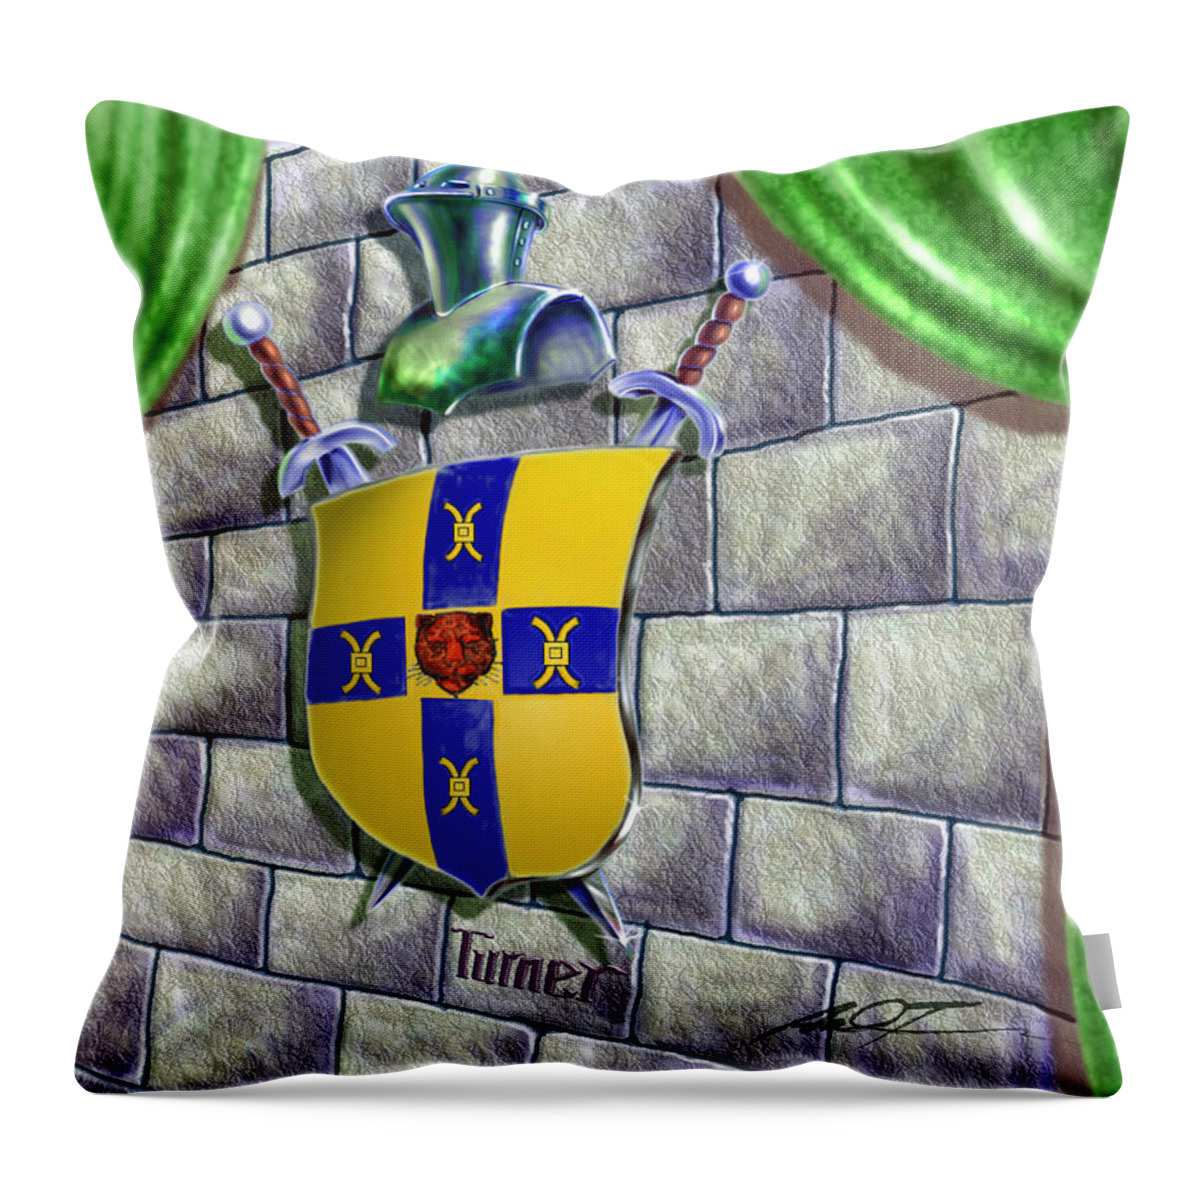 Family Throw Pillow featuring the painting Turner Family Crest by Dale Turner